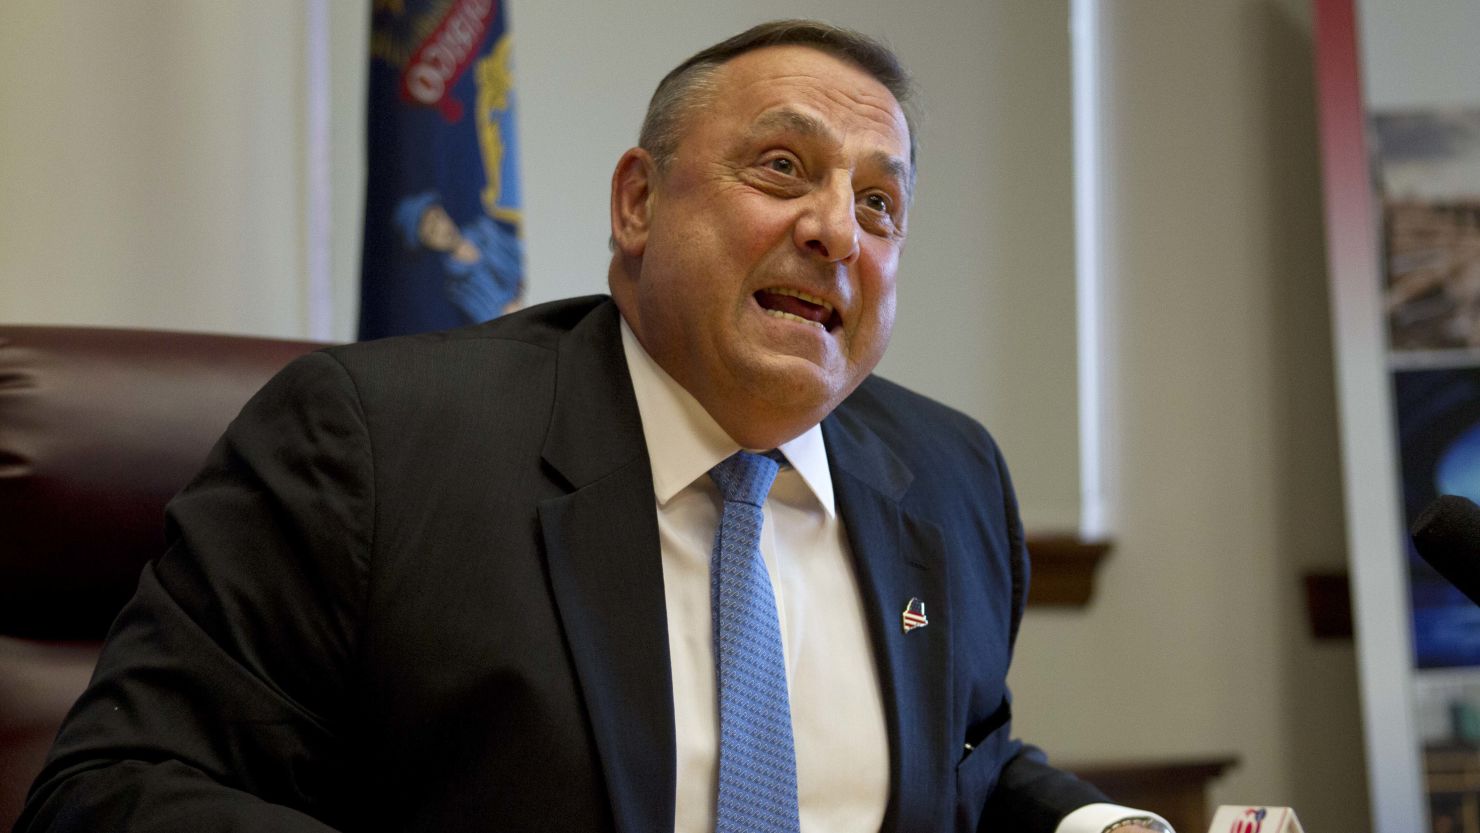 Gov. Paul LePage speaks to reporters after the Maine House and Senate overrode his veto of the state budget on June 26.